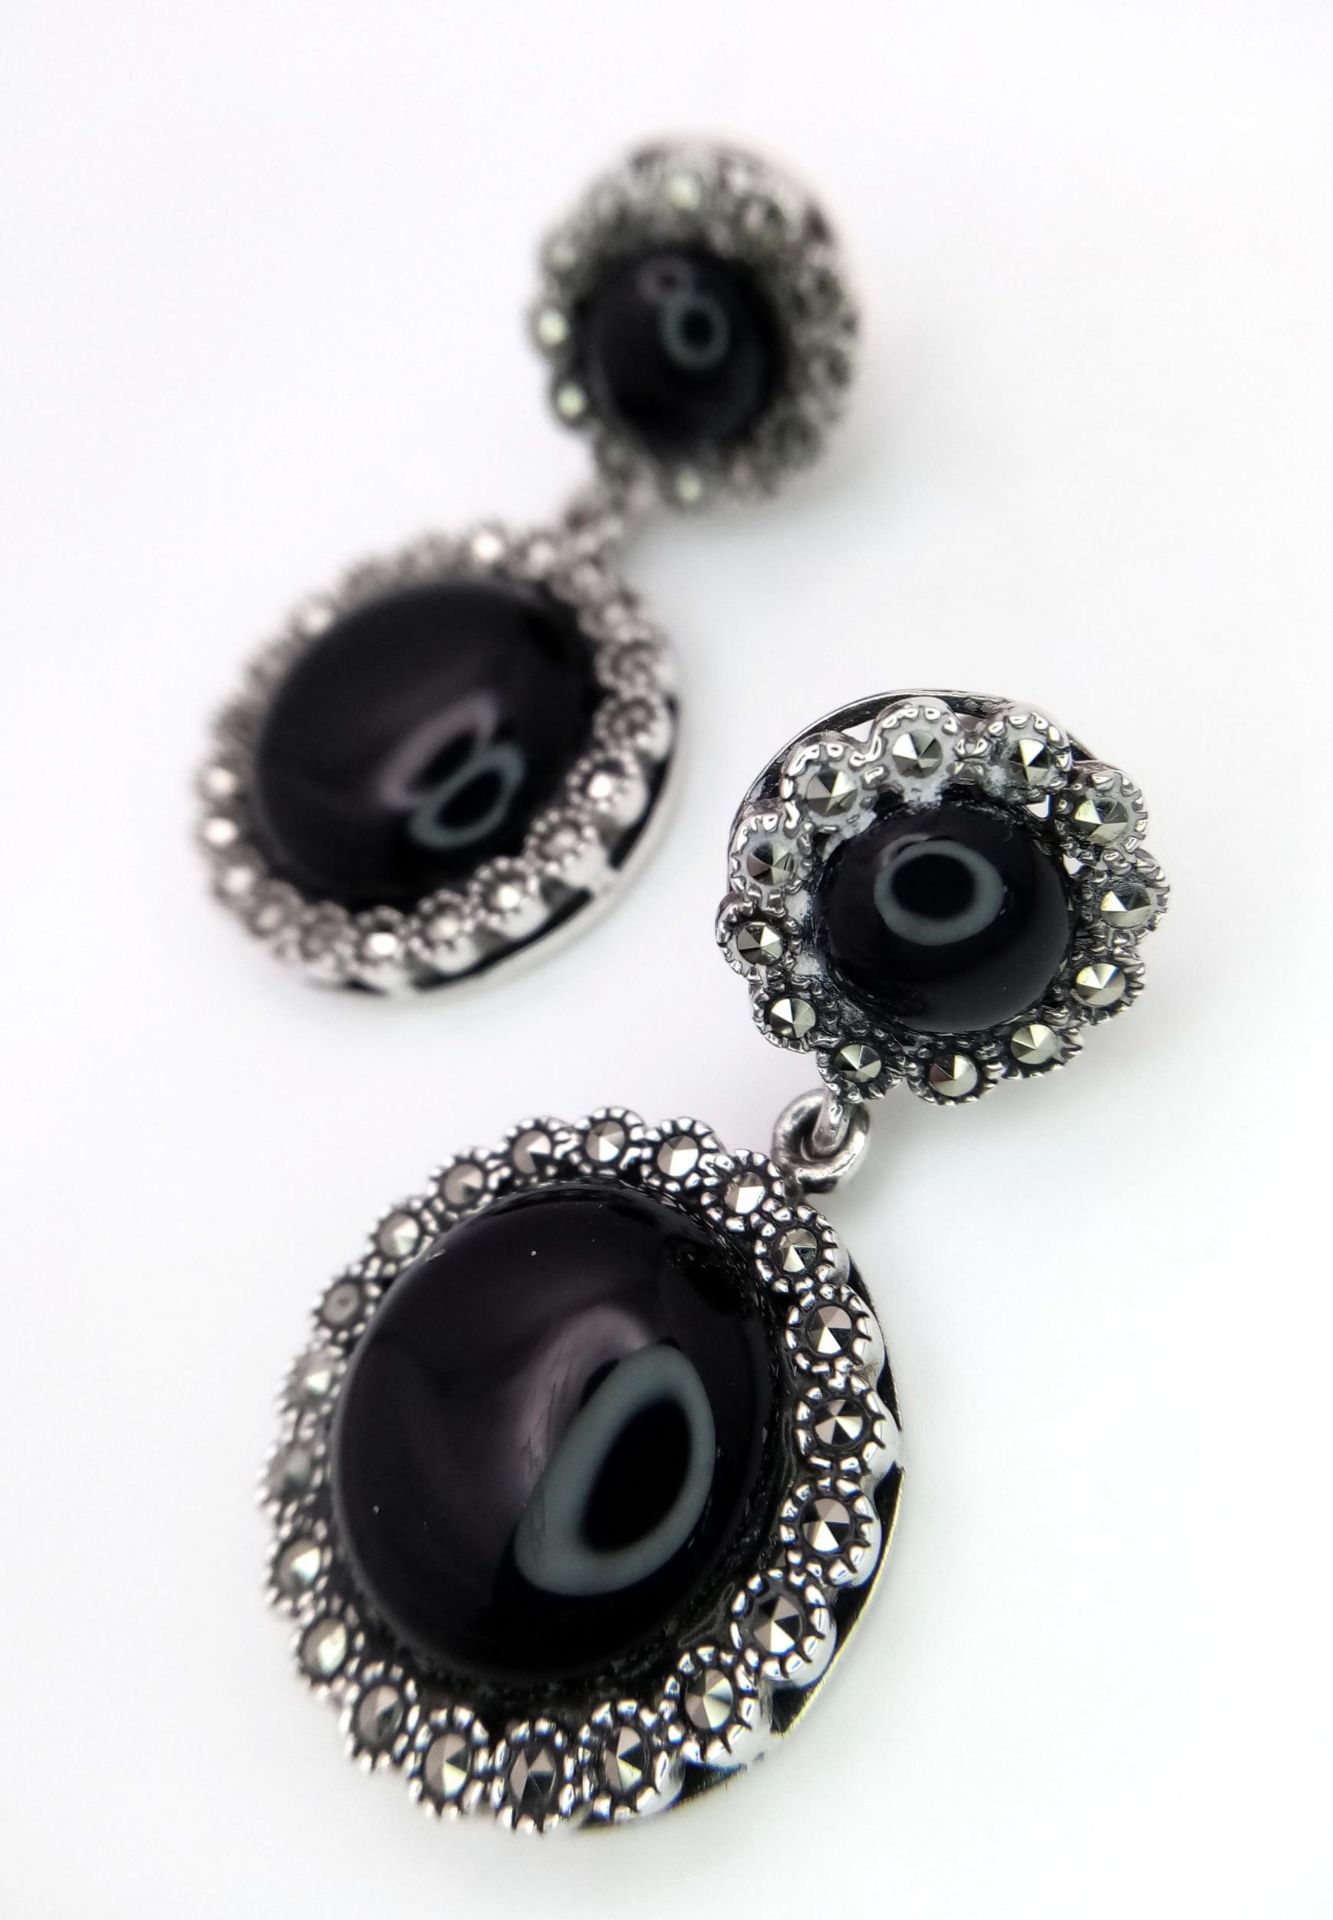 A Pair of 925 Silver, Black Onyx and Marcasite Drop Earrings. 3cm drop. Comes with a presentation